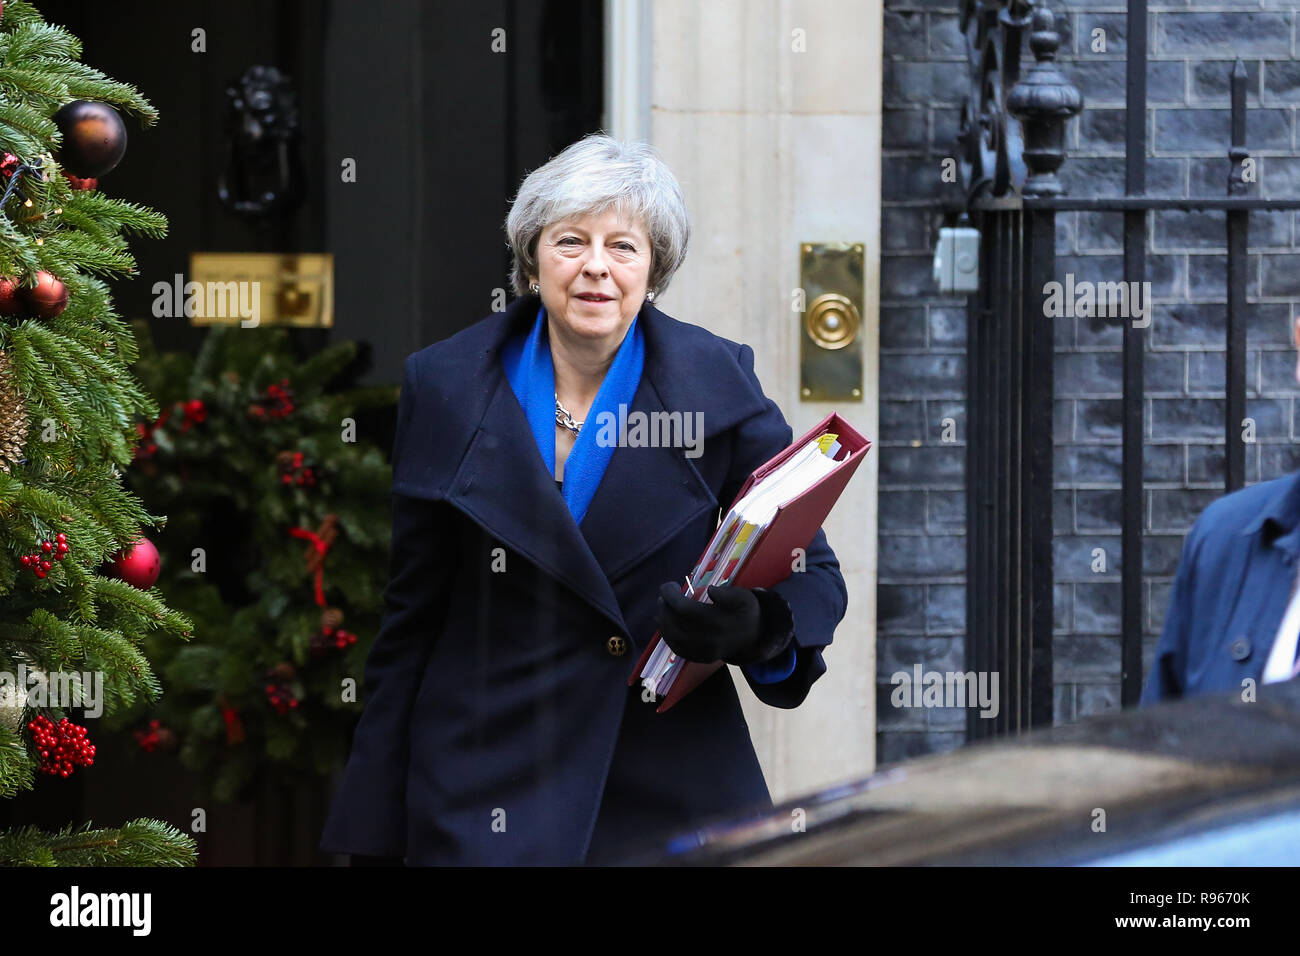 British Prime Minister Theresa May departs from Number 10 Downing Street to attend the final Prime Minister's Questions (PMQs)  of 2018 in the House of Commons with 100 day for Brexit. The United Kingdom will formally leave the European Union by 29 March 2019 and the UK Government has set aside £2 billion for a 'No Deal' Brexit. Stock Photo